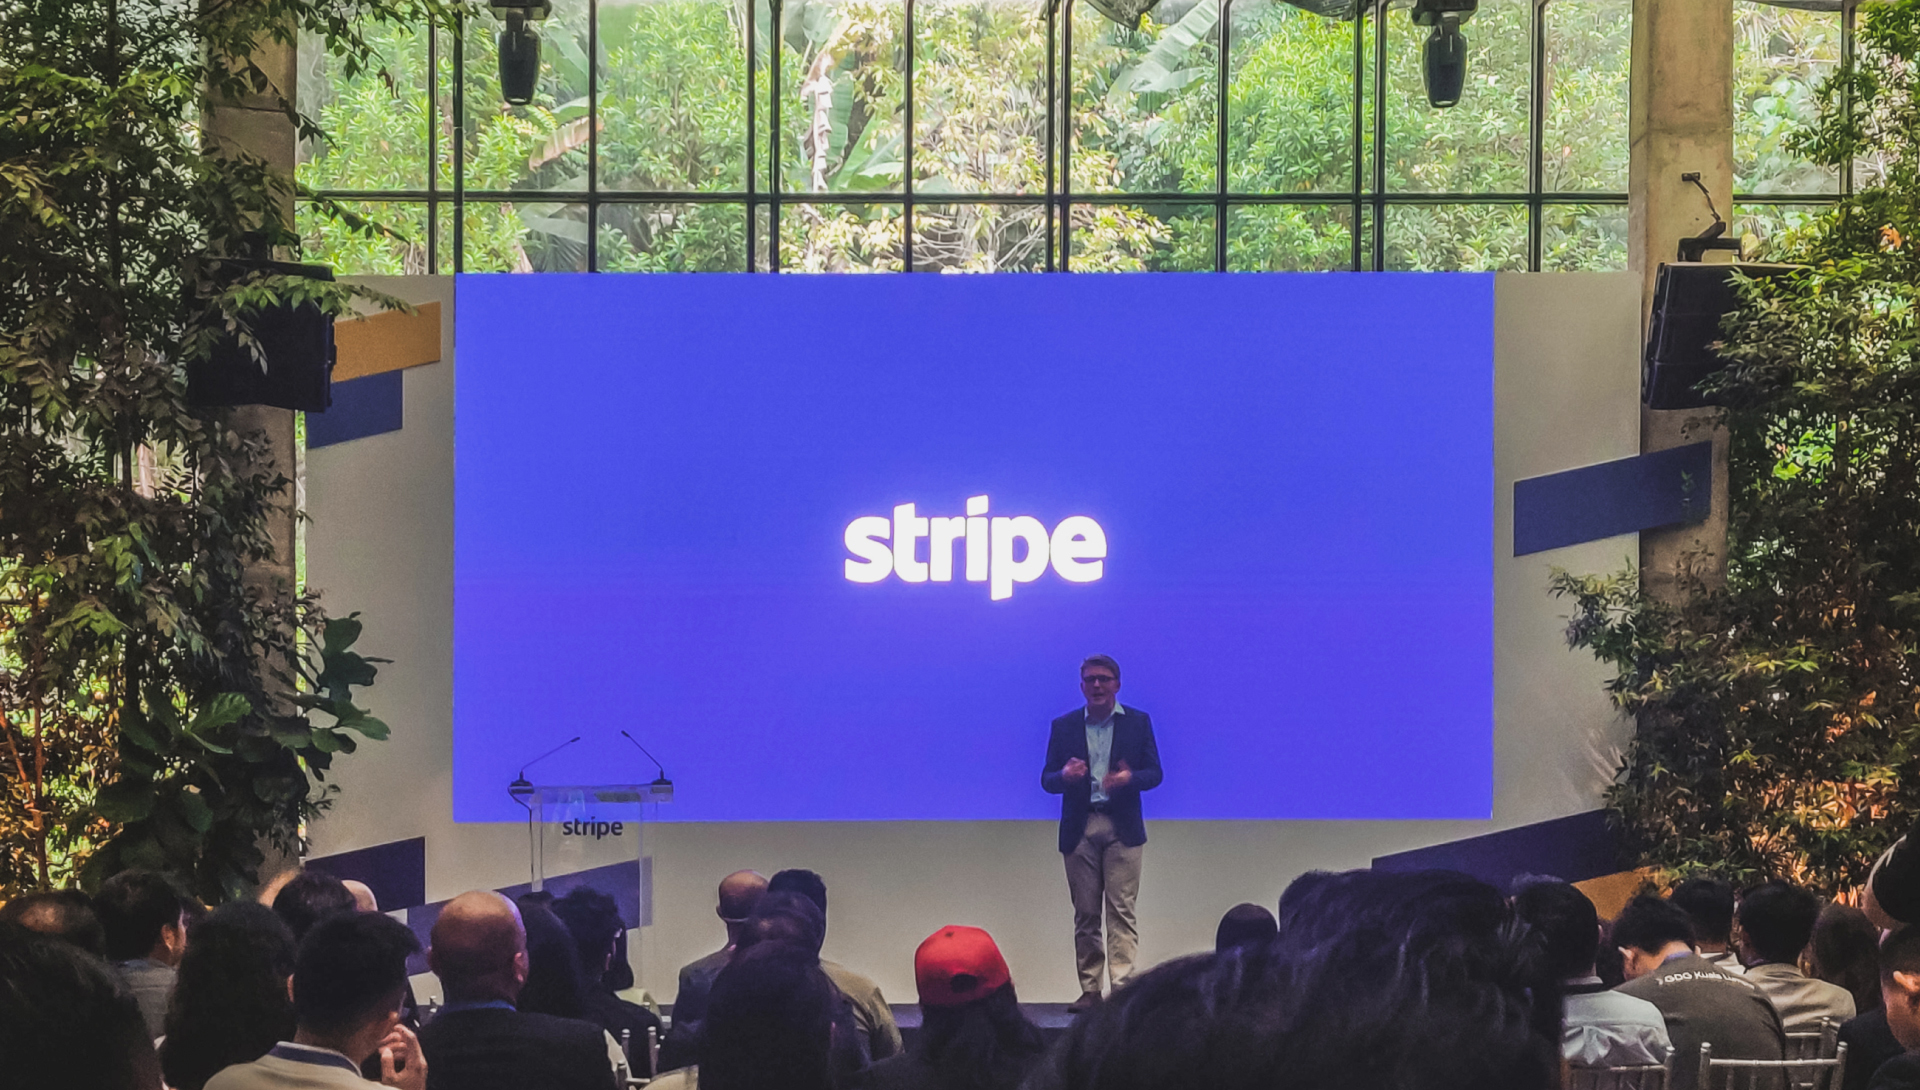 Stripe Officially Launched in Malaysia - Enabling More SMEs to Adopt eCommerce with EasyStore | EasyStore